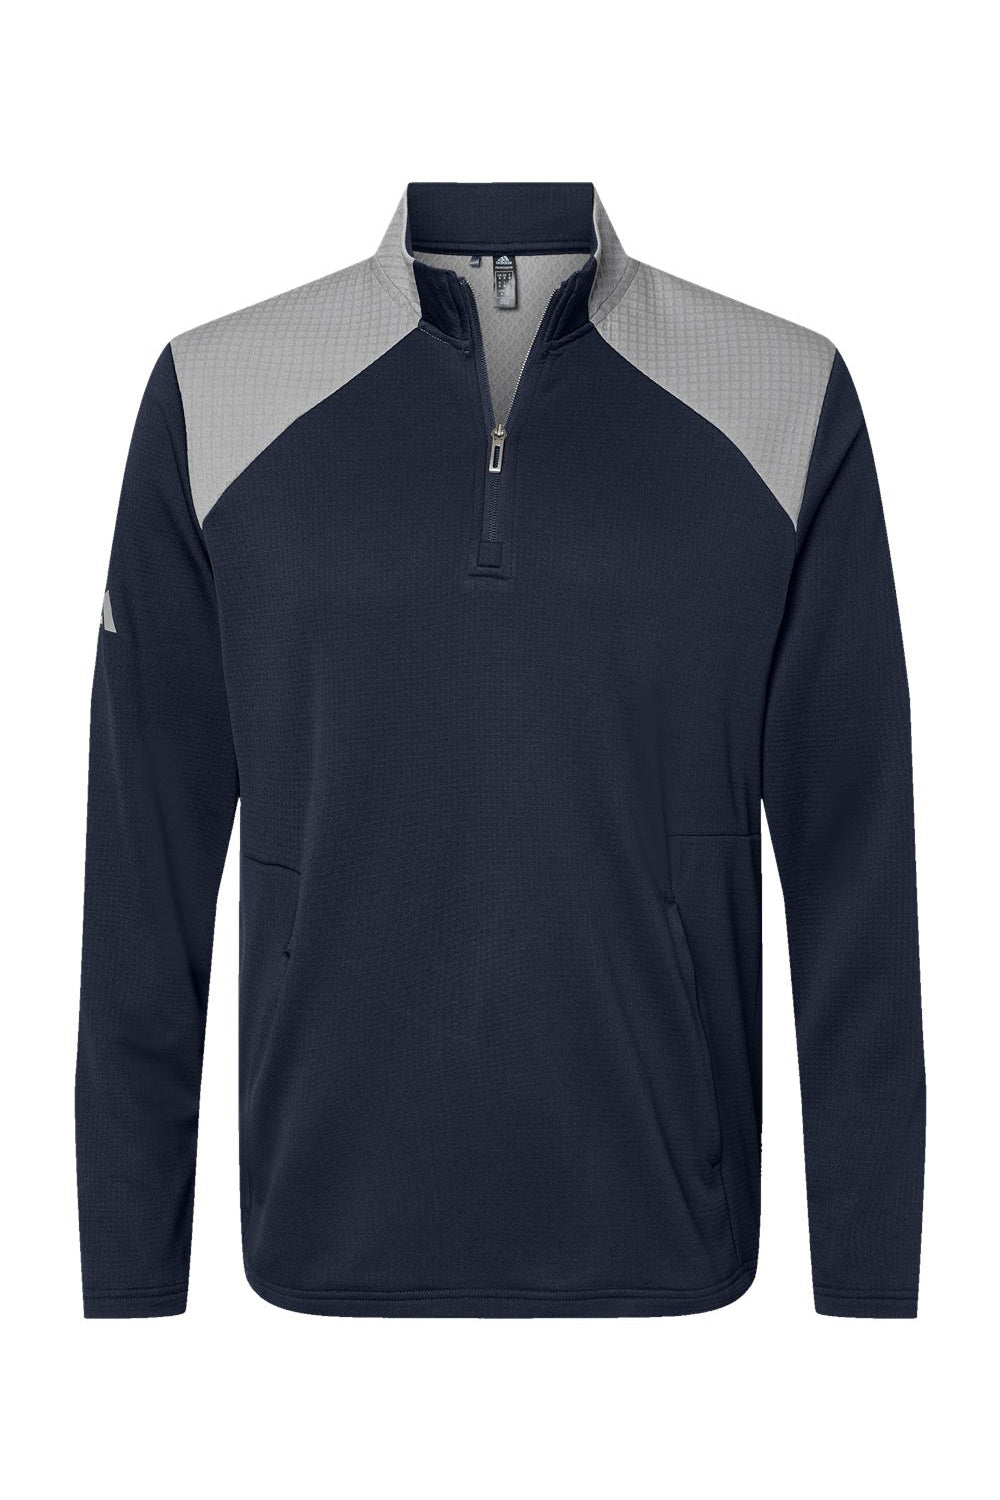 Adidas A532 Mens Textured Mixed Media 1/4 Zip Pullover Collegiate Navy Blue/Grey Flat Front